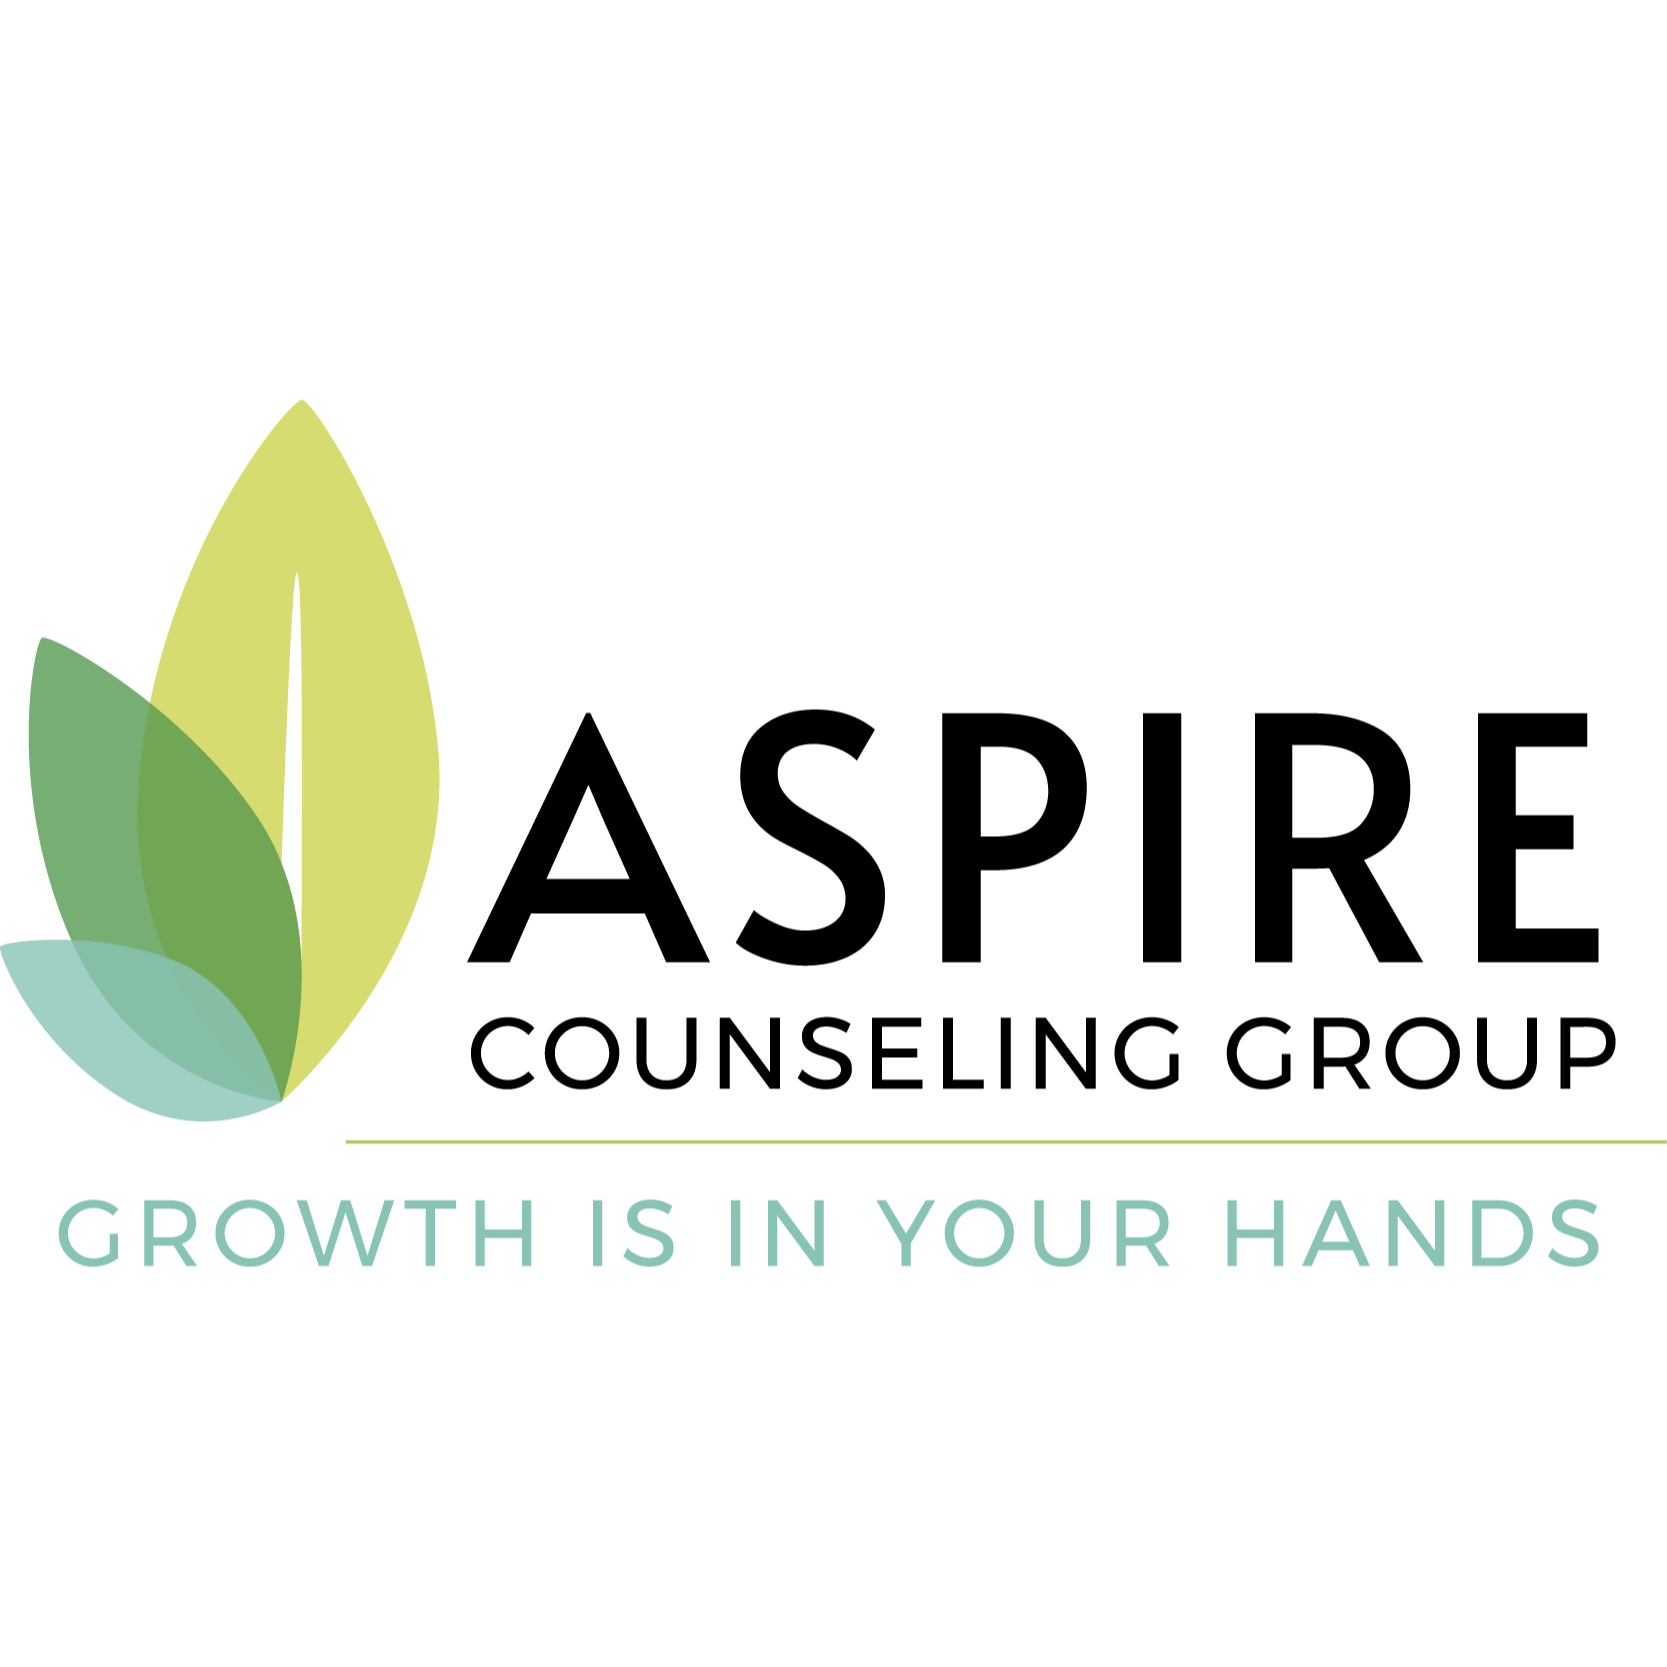 Aspire Counseling Group - Raleigh, NC 27605 - (919)229-9834 | ShowMeLocal.com